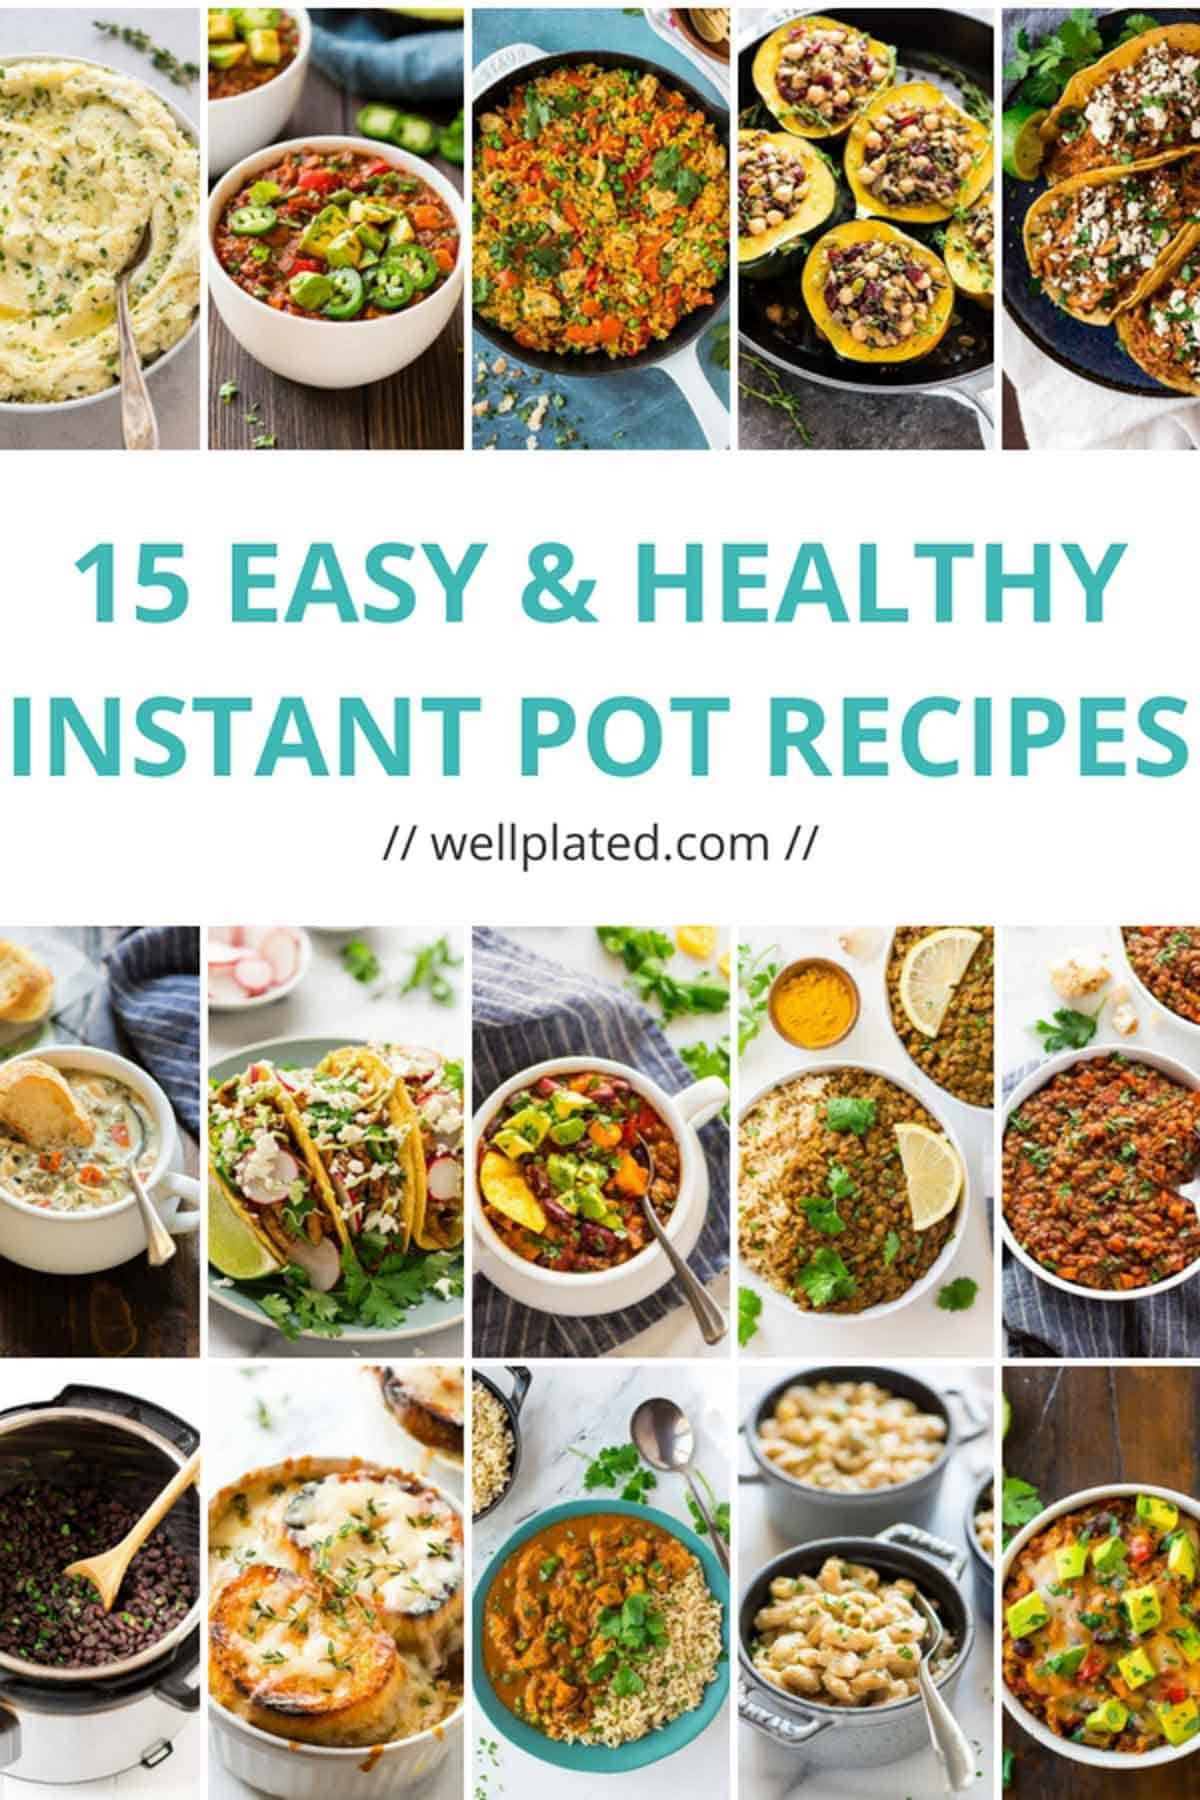 Recipes For The Instant Pot
 Healthy Instant Pot Recipes That Anyone Can Make